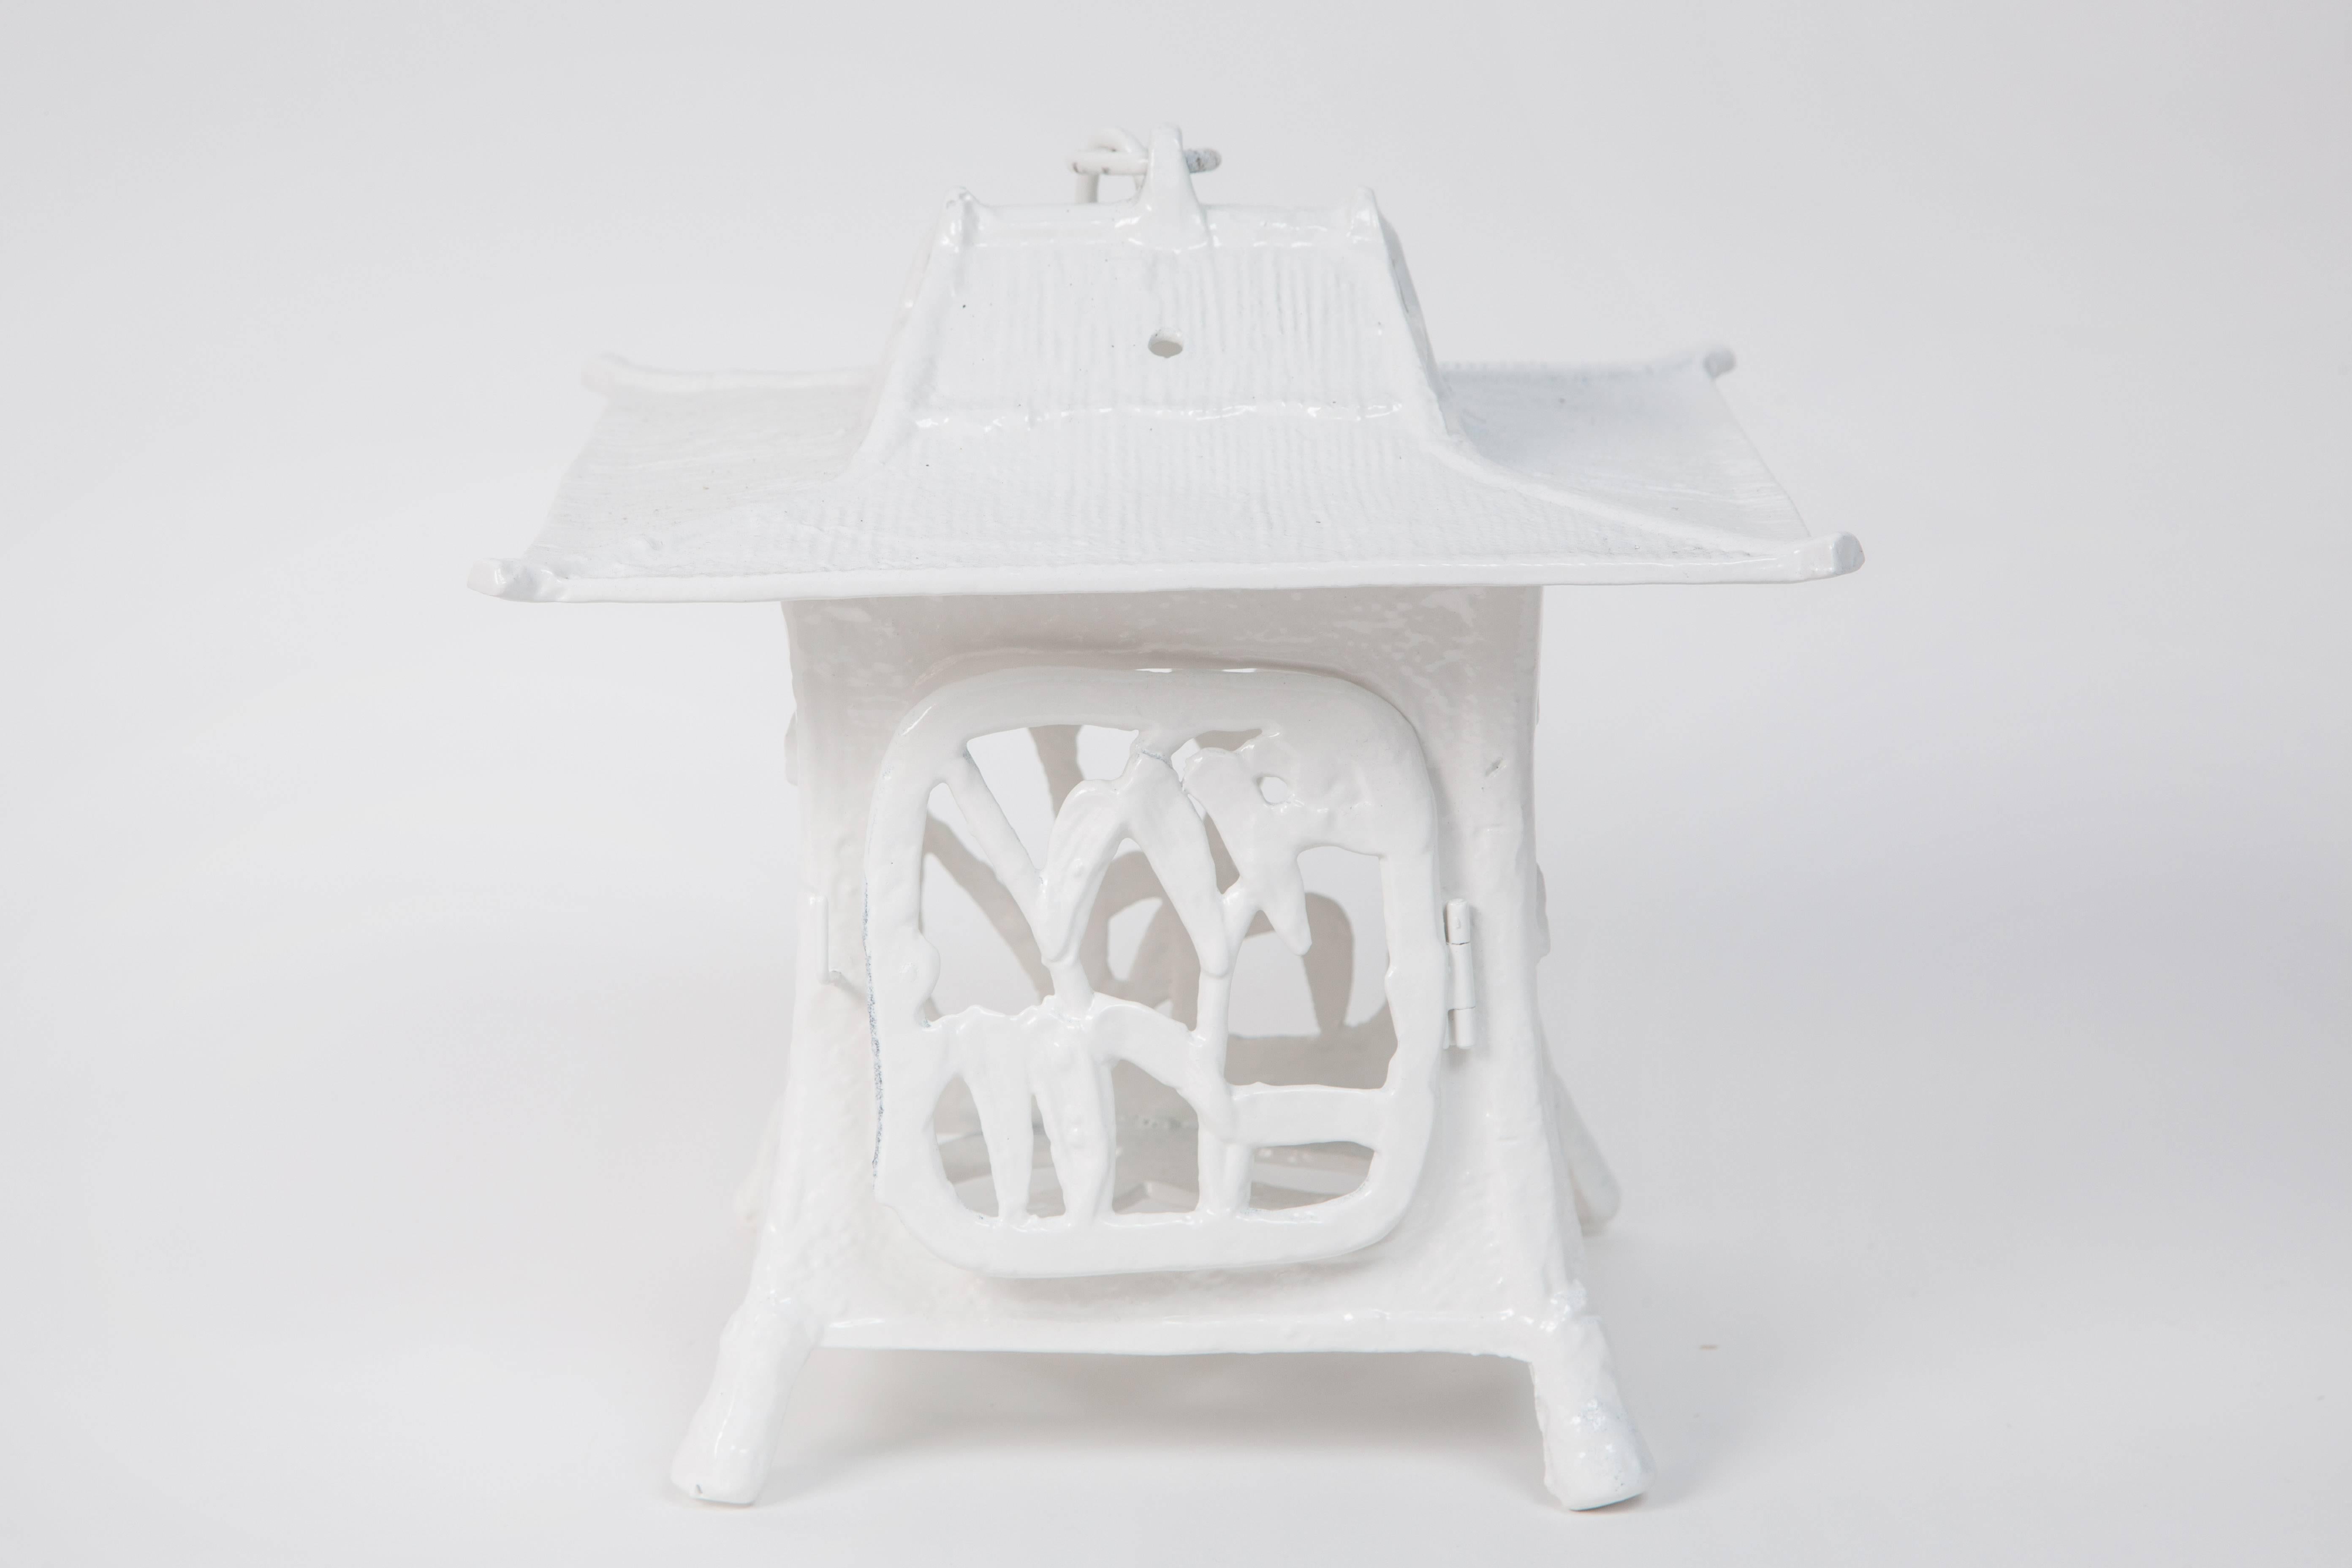 Chic set of three cast iron pagodas from the 1960s re-imagined in white hi-gloss lacquer. Can be used as display pieces or hanging lanterns (metal canopies are included).

Dimensions:
9